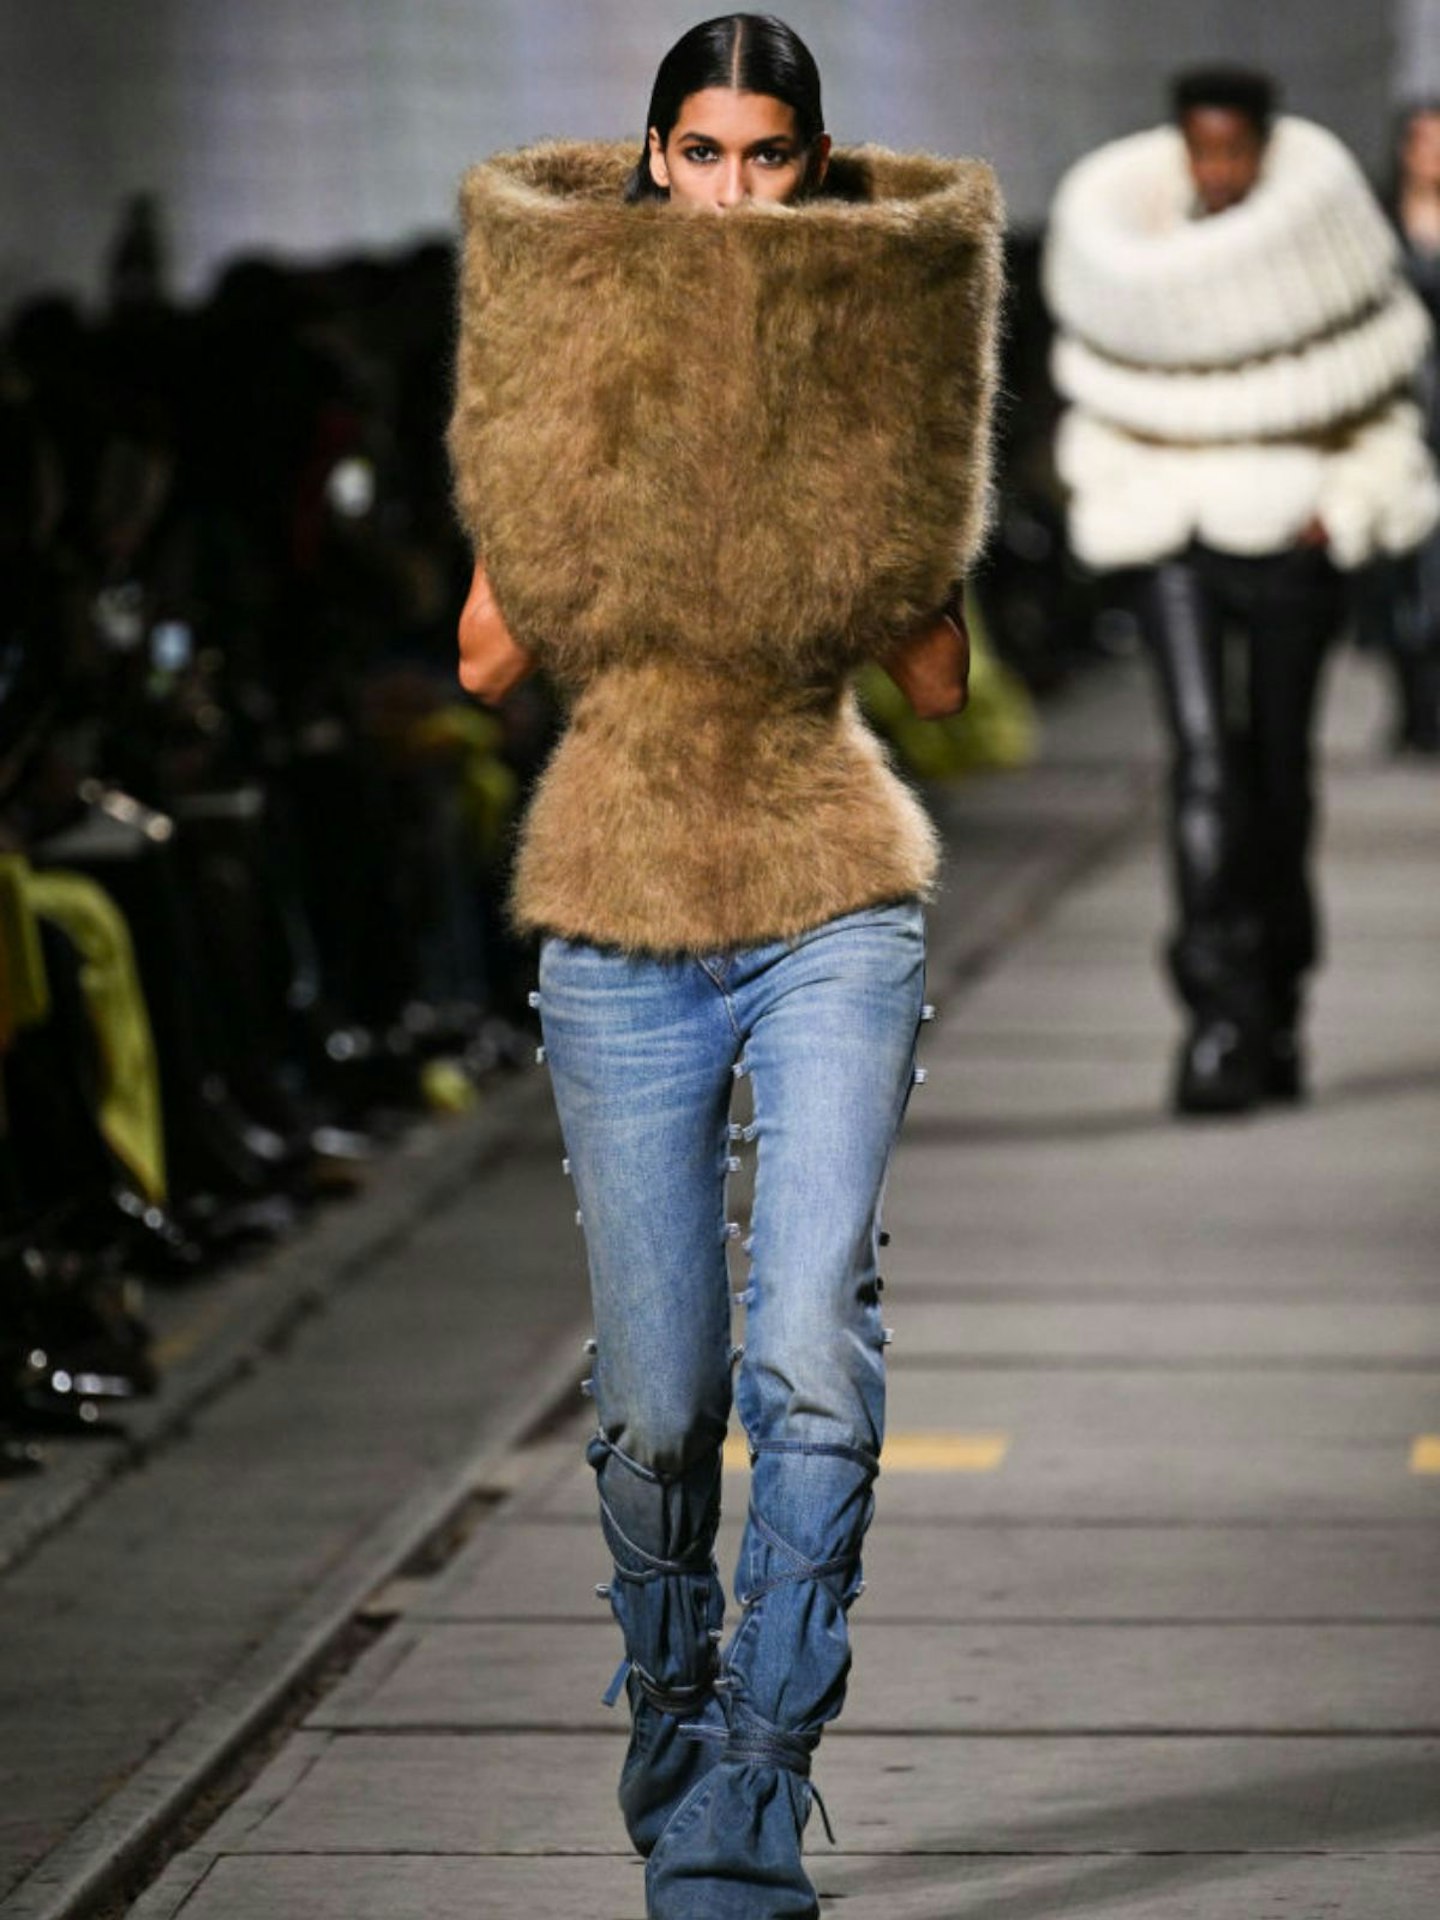 Alexander McQueen A/W 2024 catwalk at Paris Fashion Week, featuring low-rise jeans